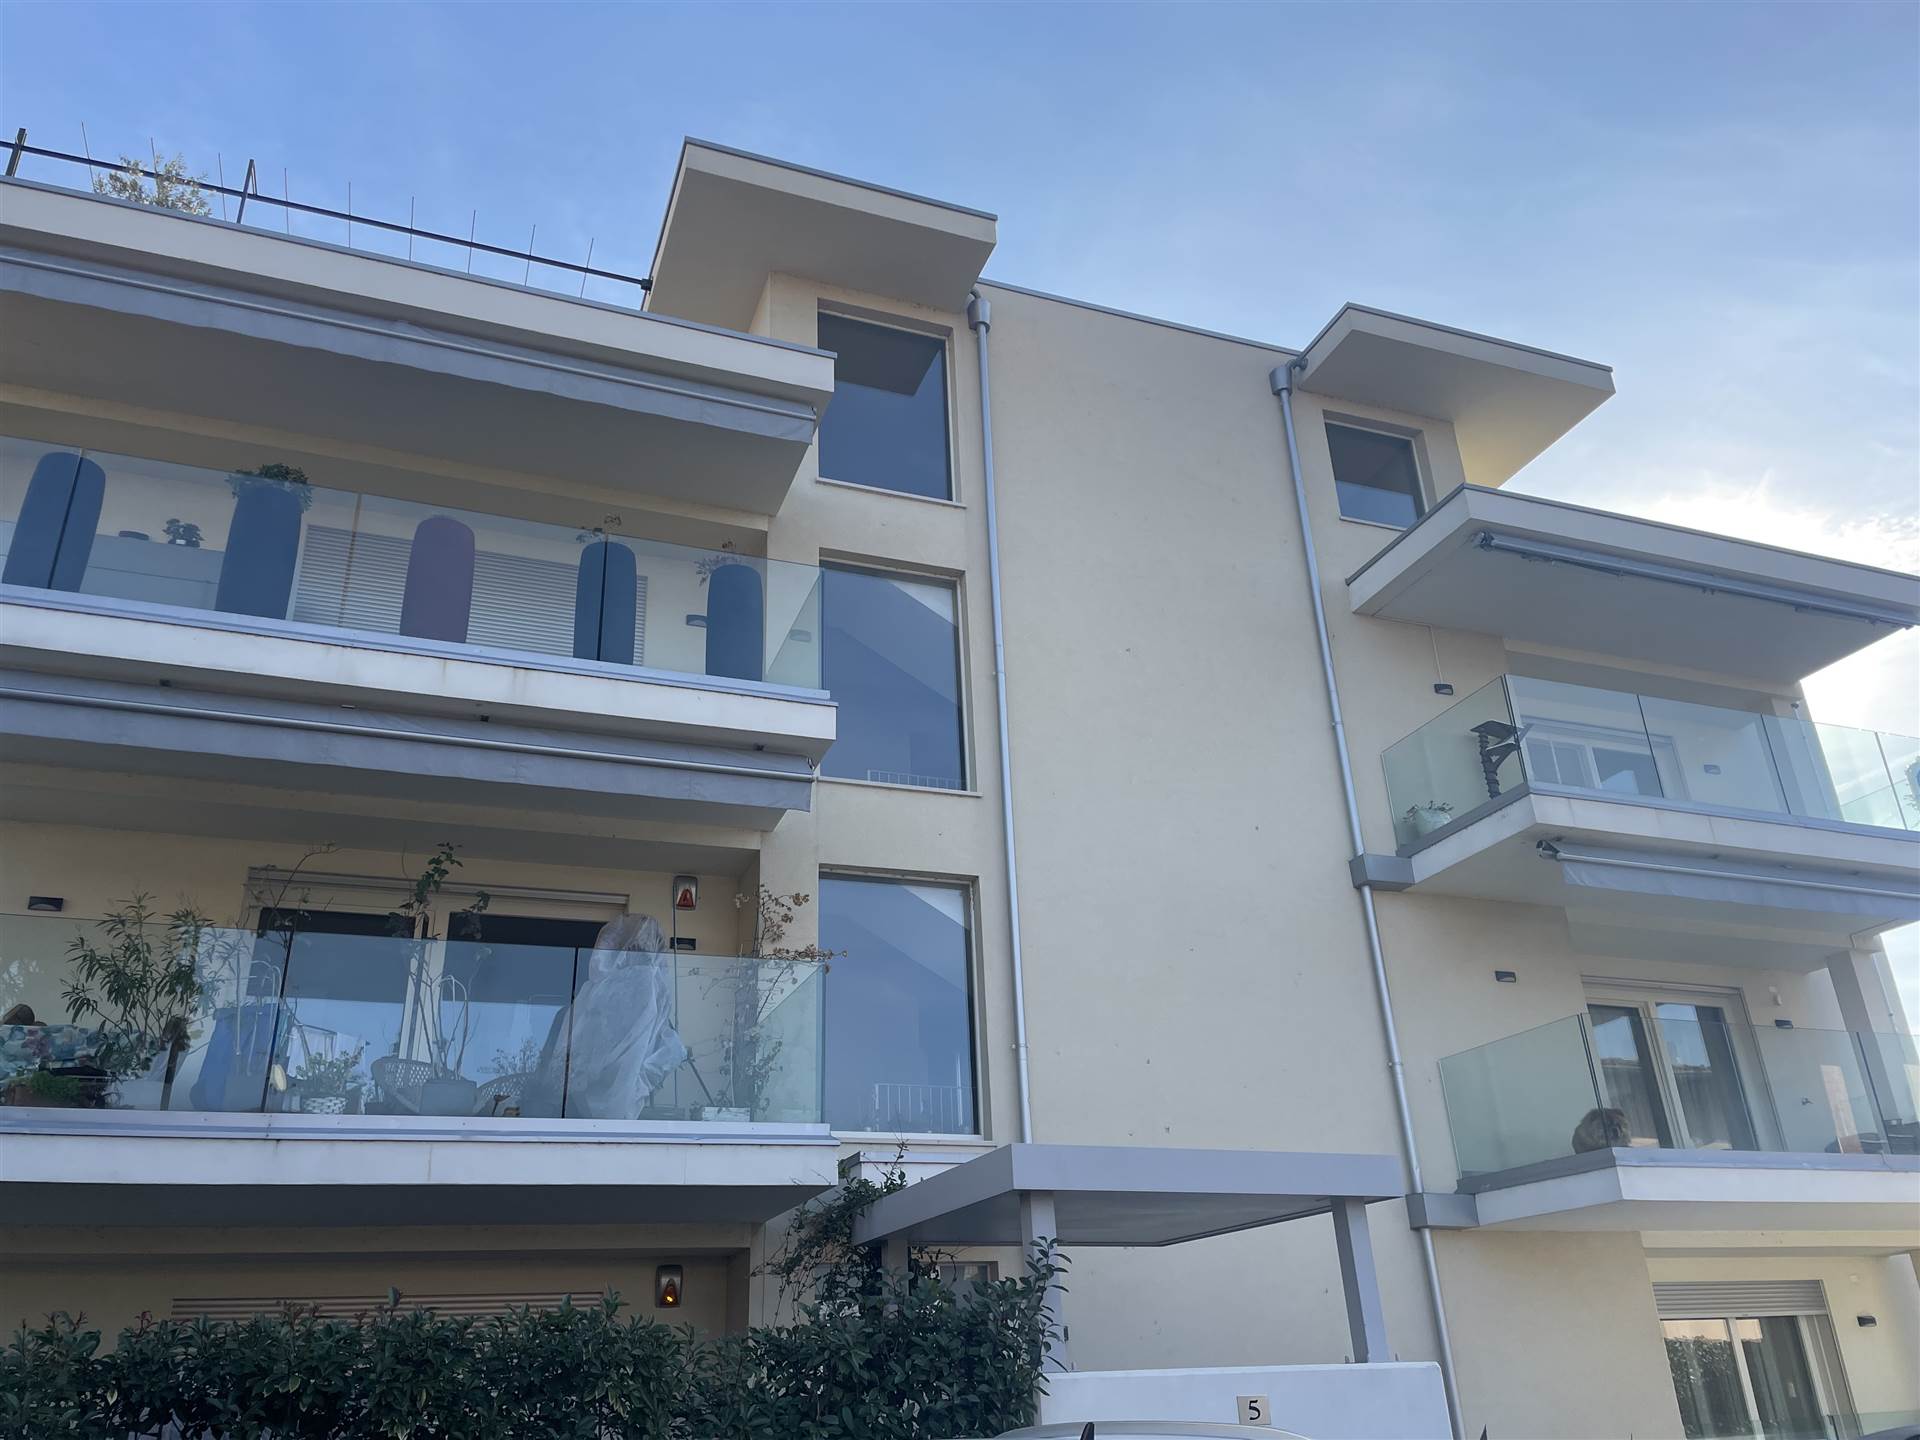 RIVOLTELLA DEL GARDA, DESENZANO DEL GARDA, Penthouse for sale of 107 Sq. mt., New construction, Heating To floor, Energetic class: A3, placed at 2°, composed by: 6 Rooms, Show cooking, , 3 Bedrooms, 